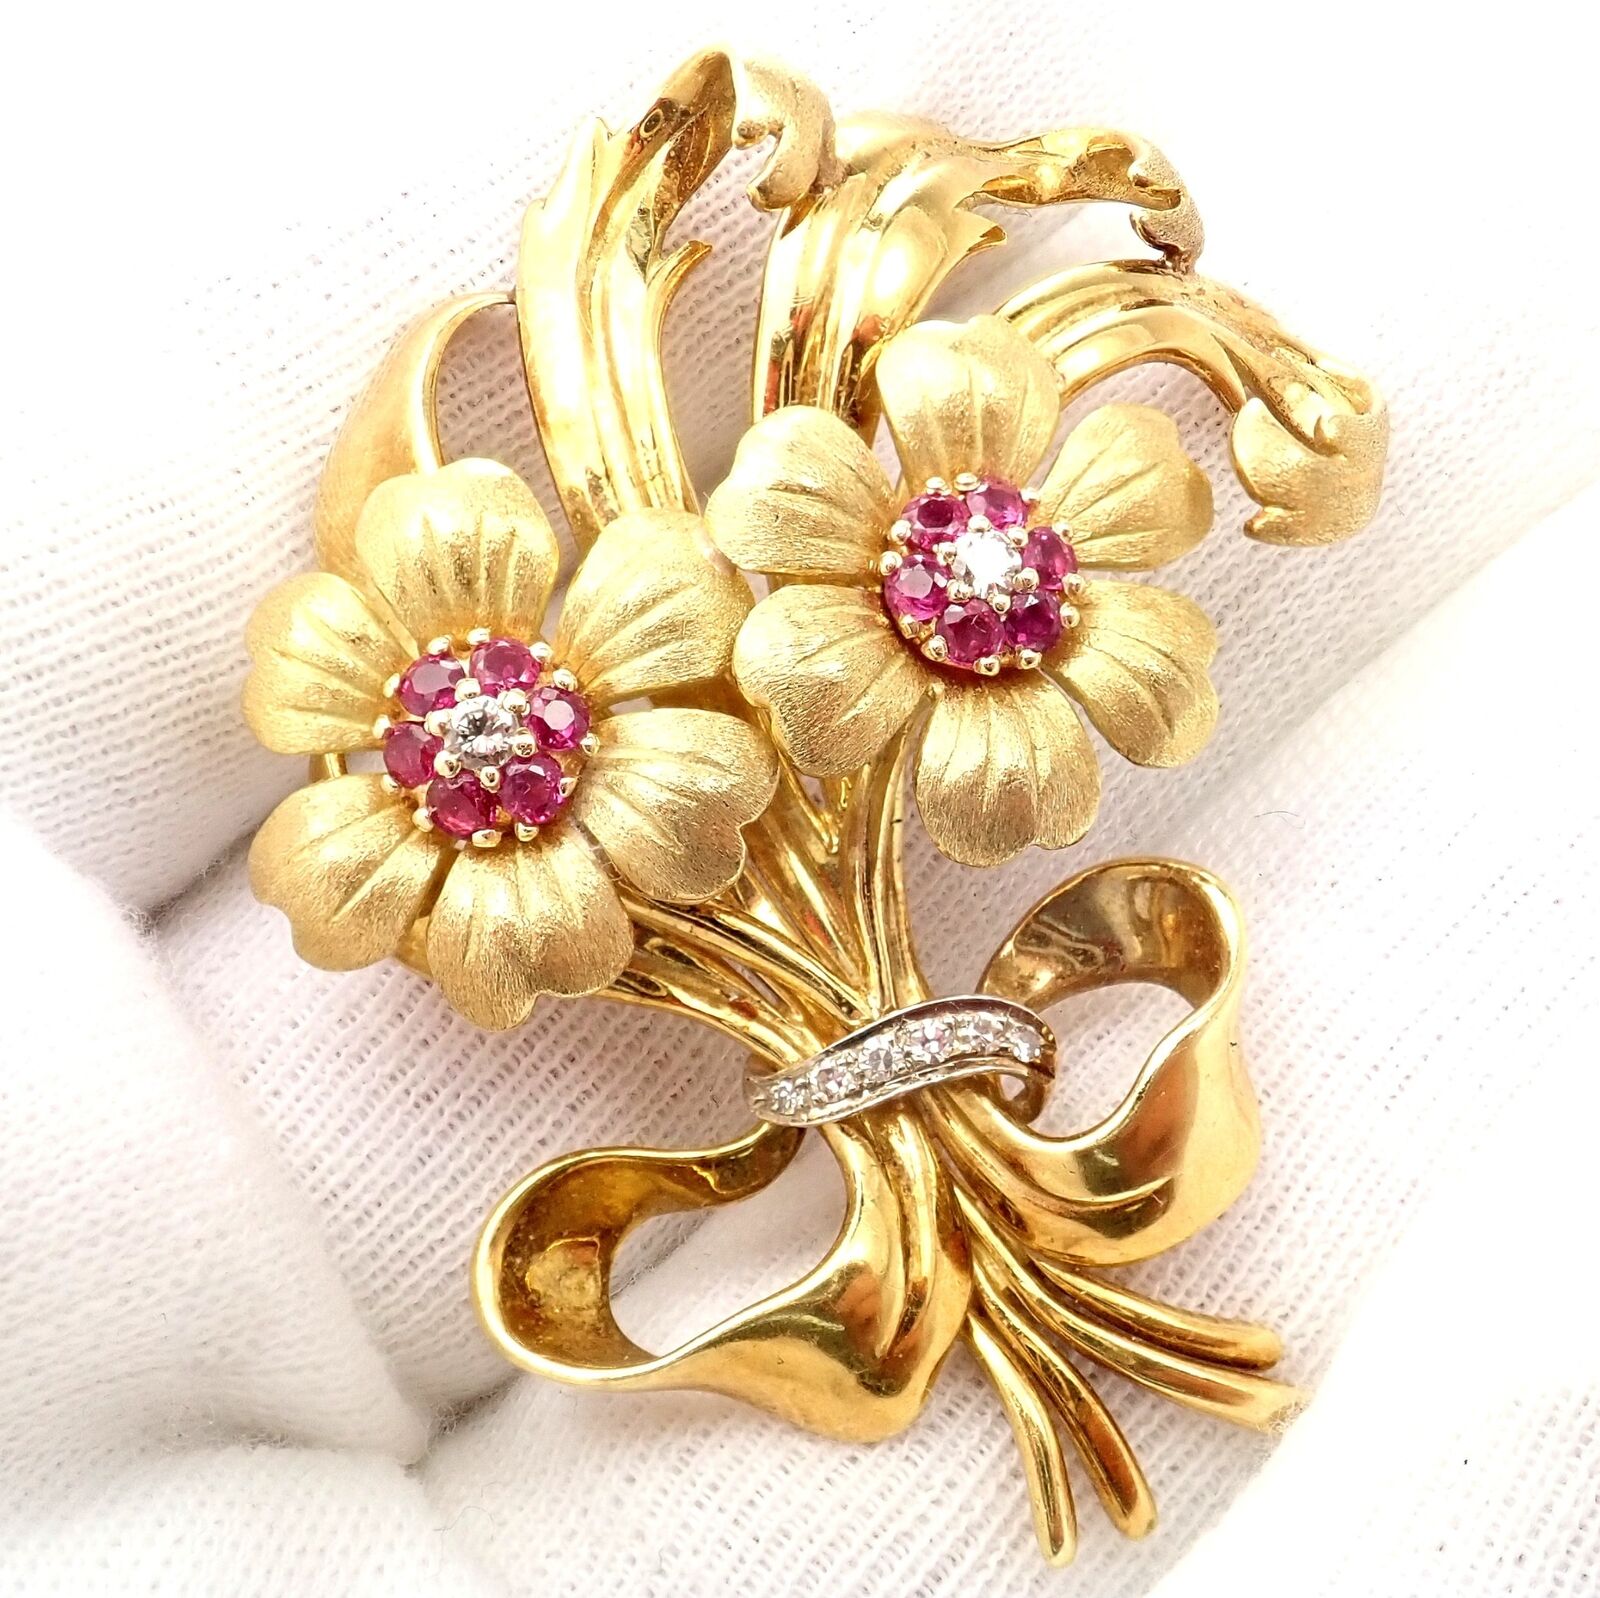 Authentic Vintage Cartier 18k Yellow Gold Ruby Diamond Flower Large Brooch  Pin